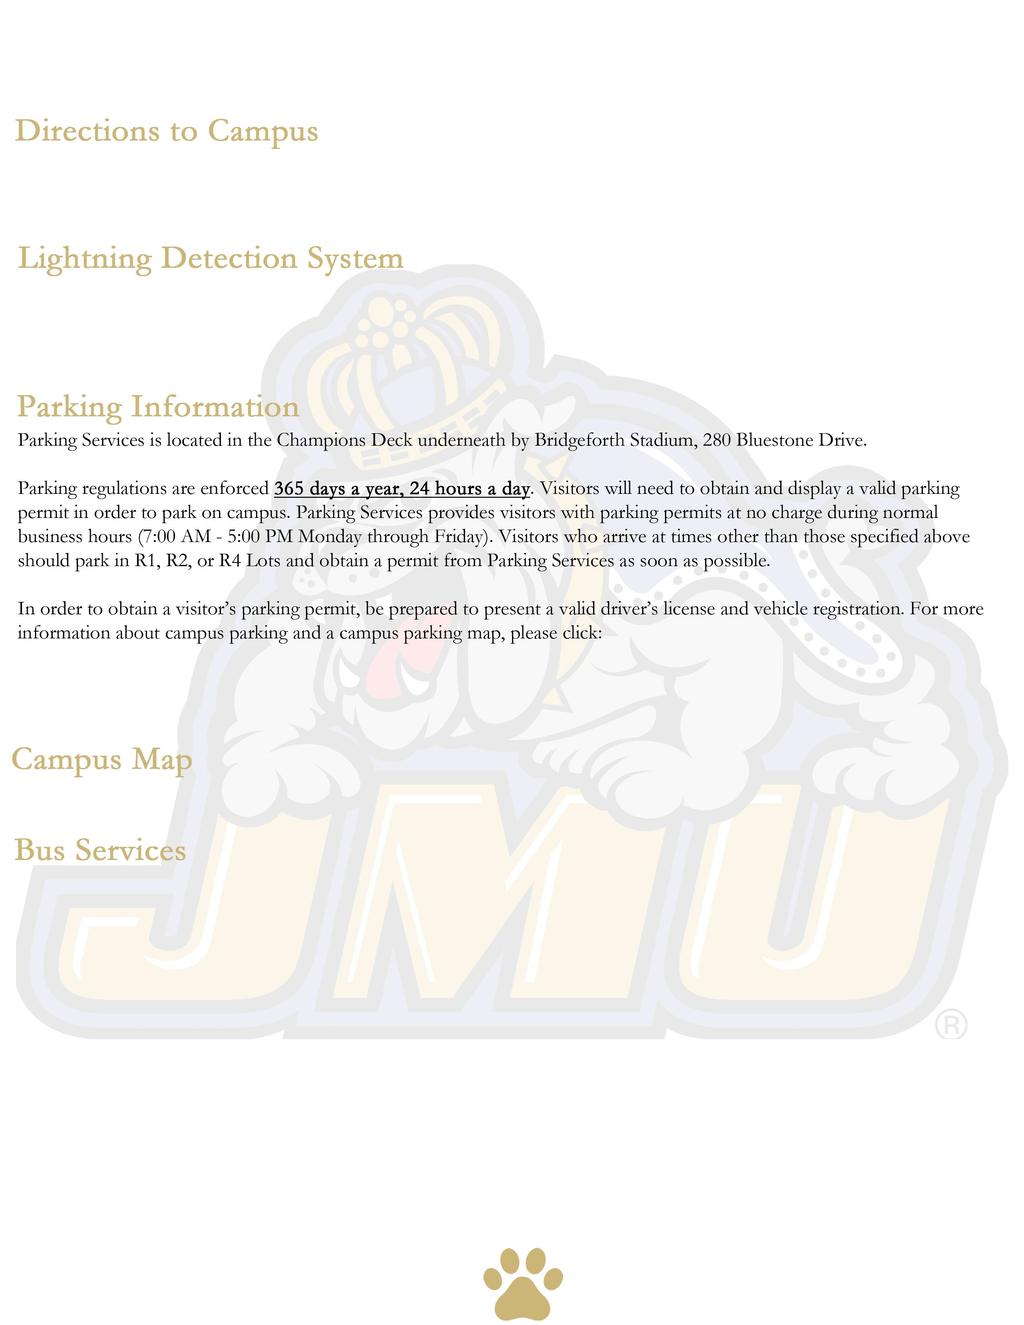 Facilities For comprehensive directions to the James Madison University campus, please visit Directions to JMU Campus and Transportation to JMU Campus.